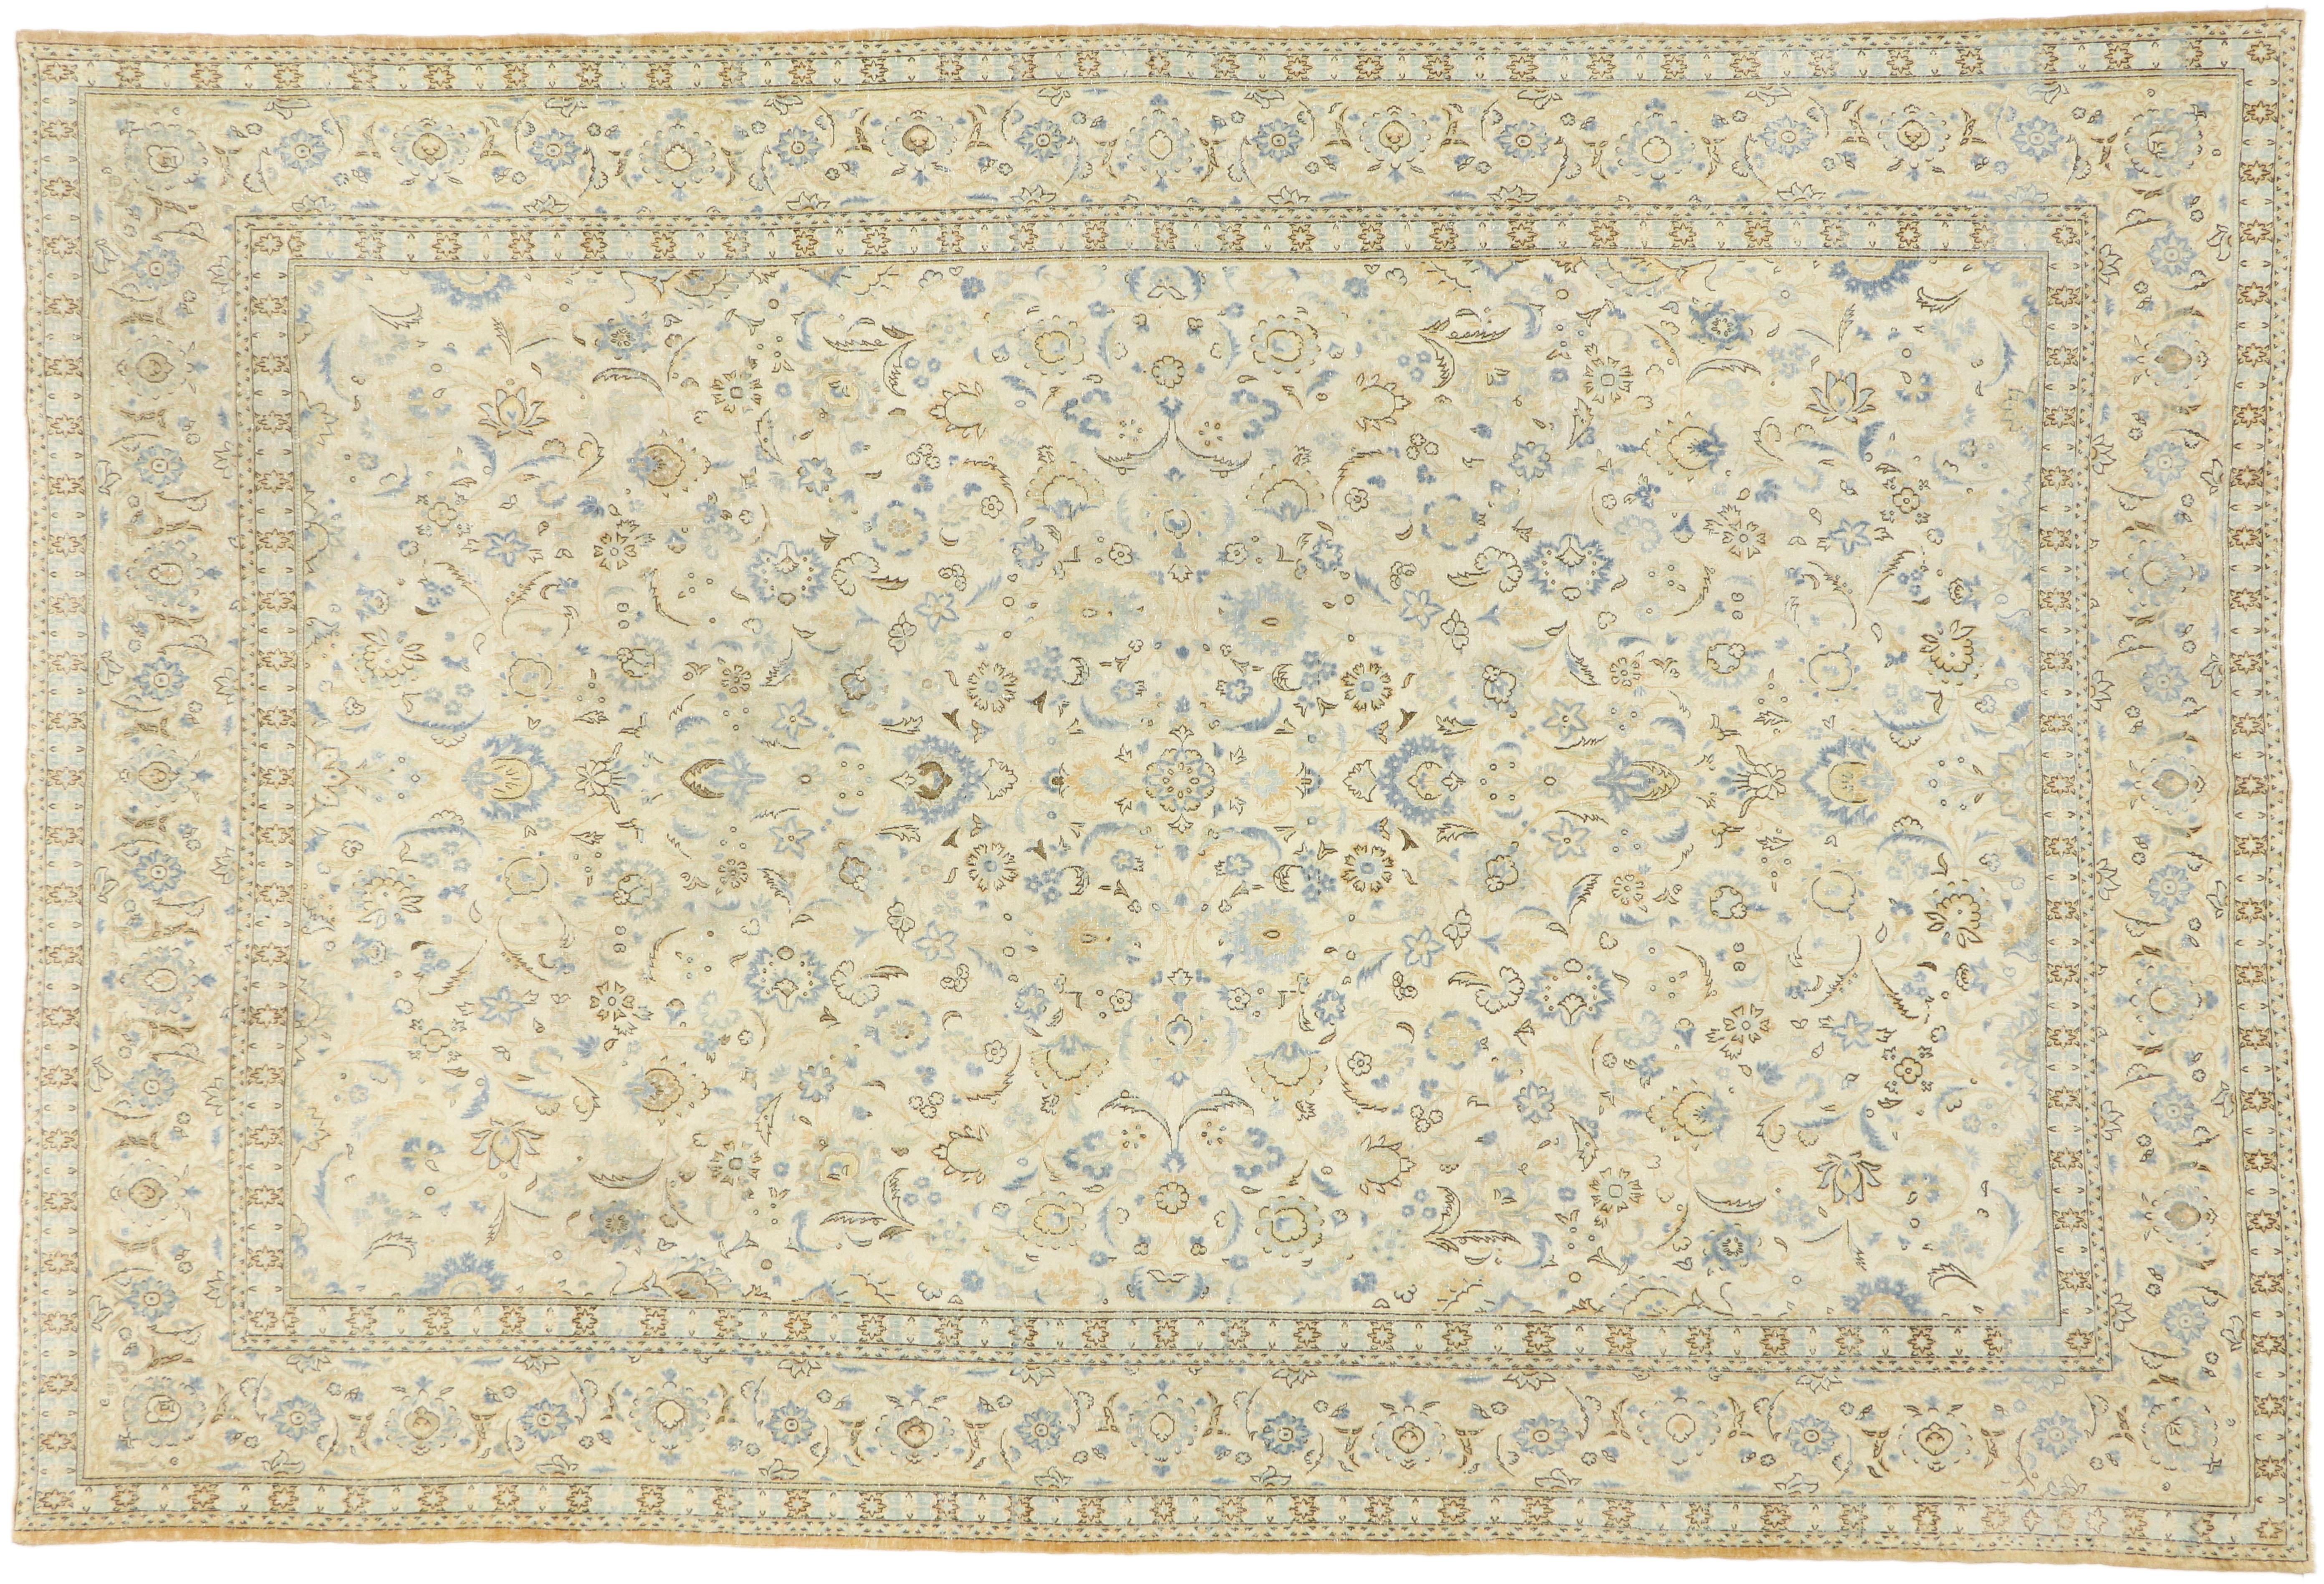 Distressed Antique Persian Kashan Rug with Cotswold English Manor Style For Sale 1